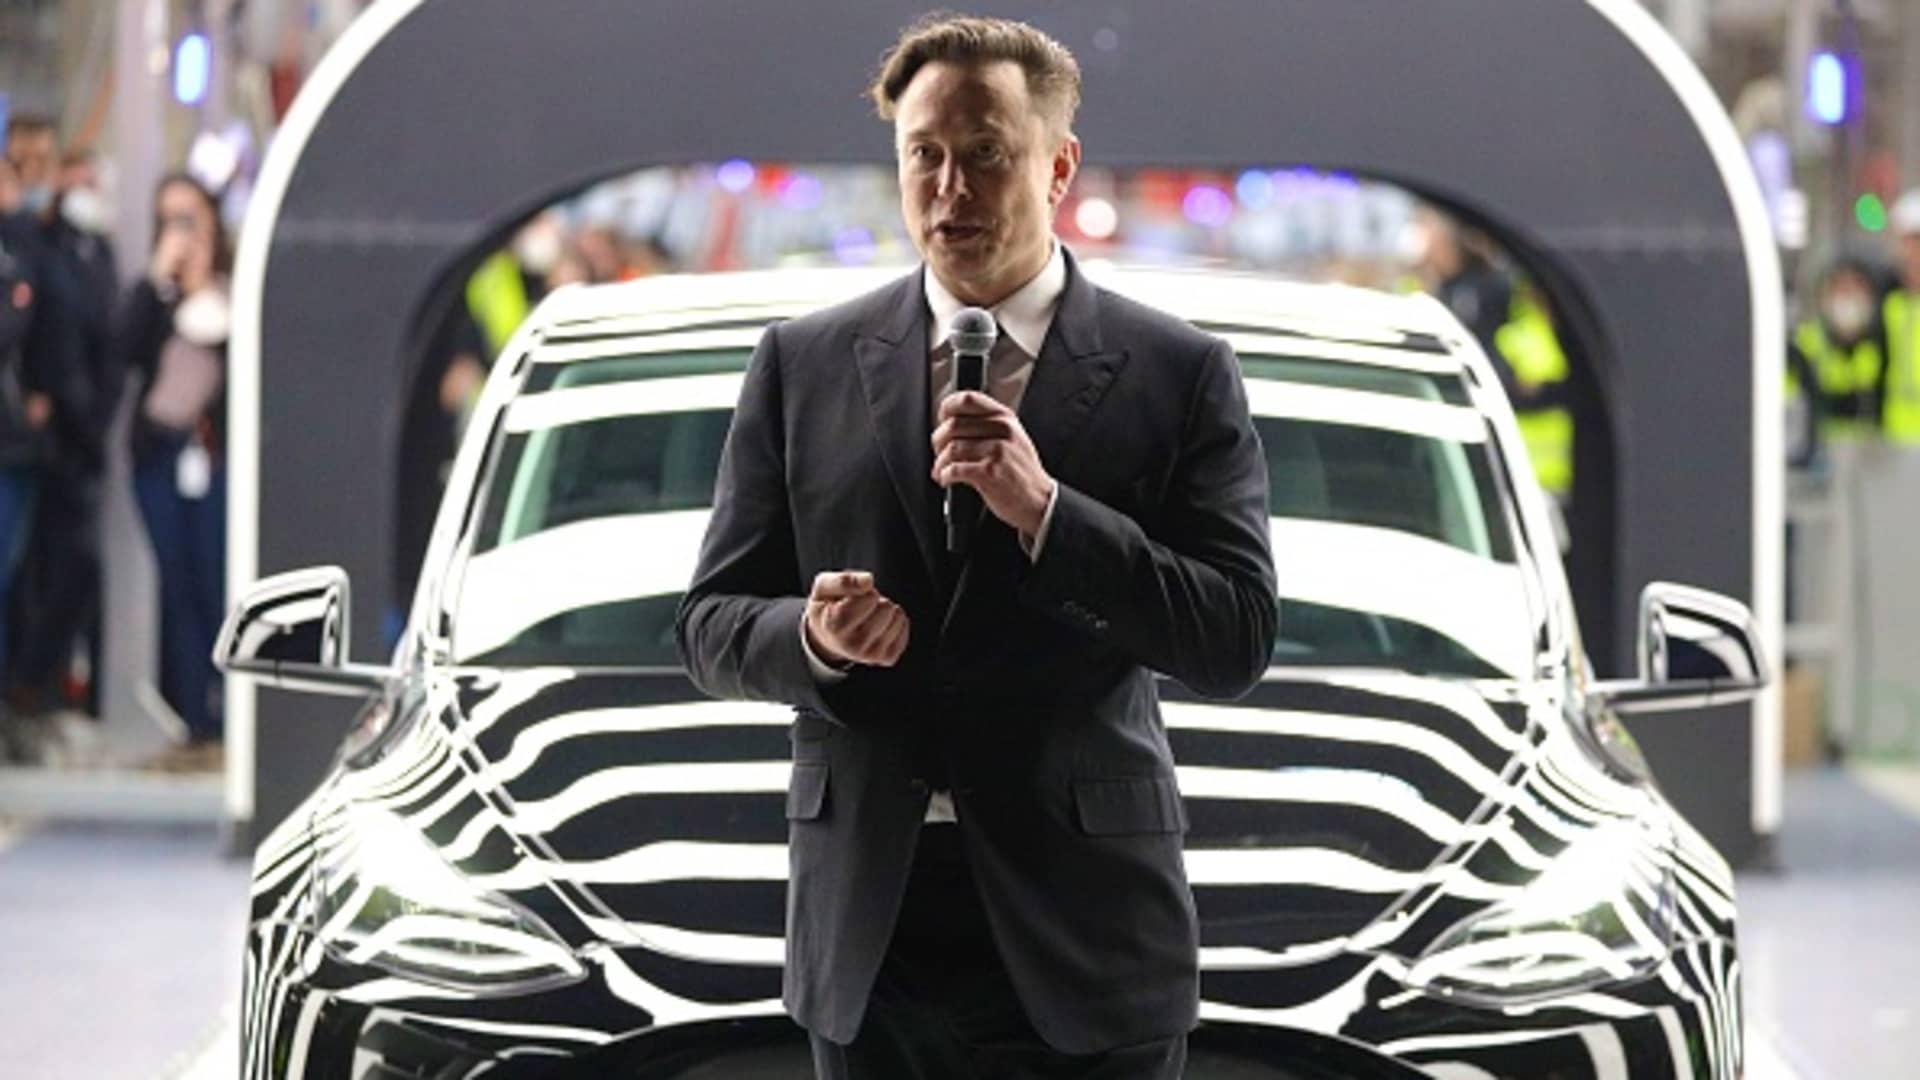 Tesla revenues grow 81% from last year – CNBC